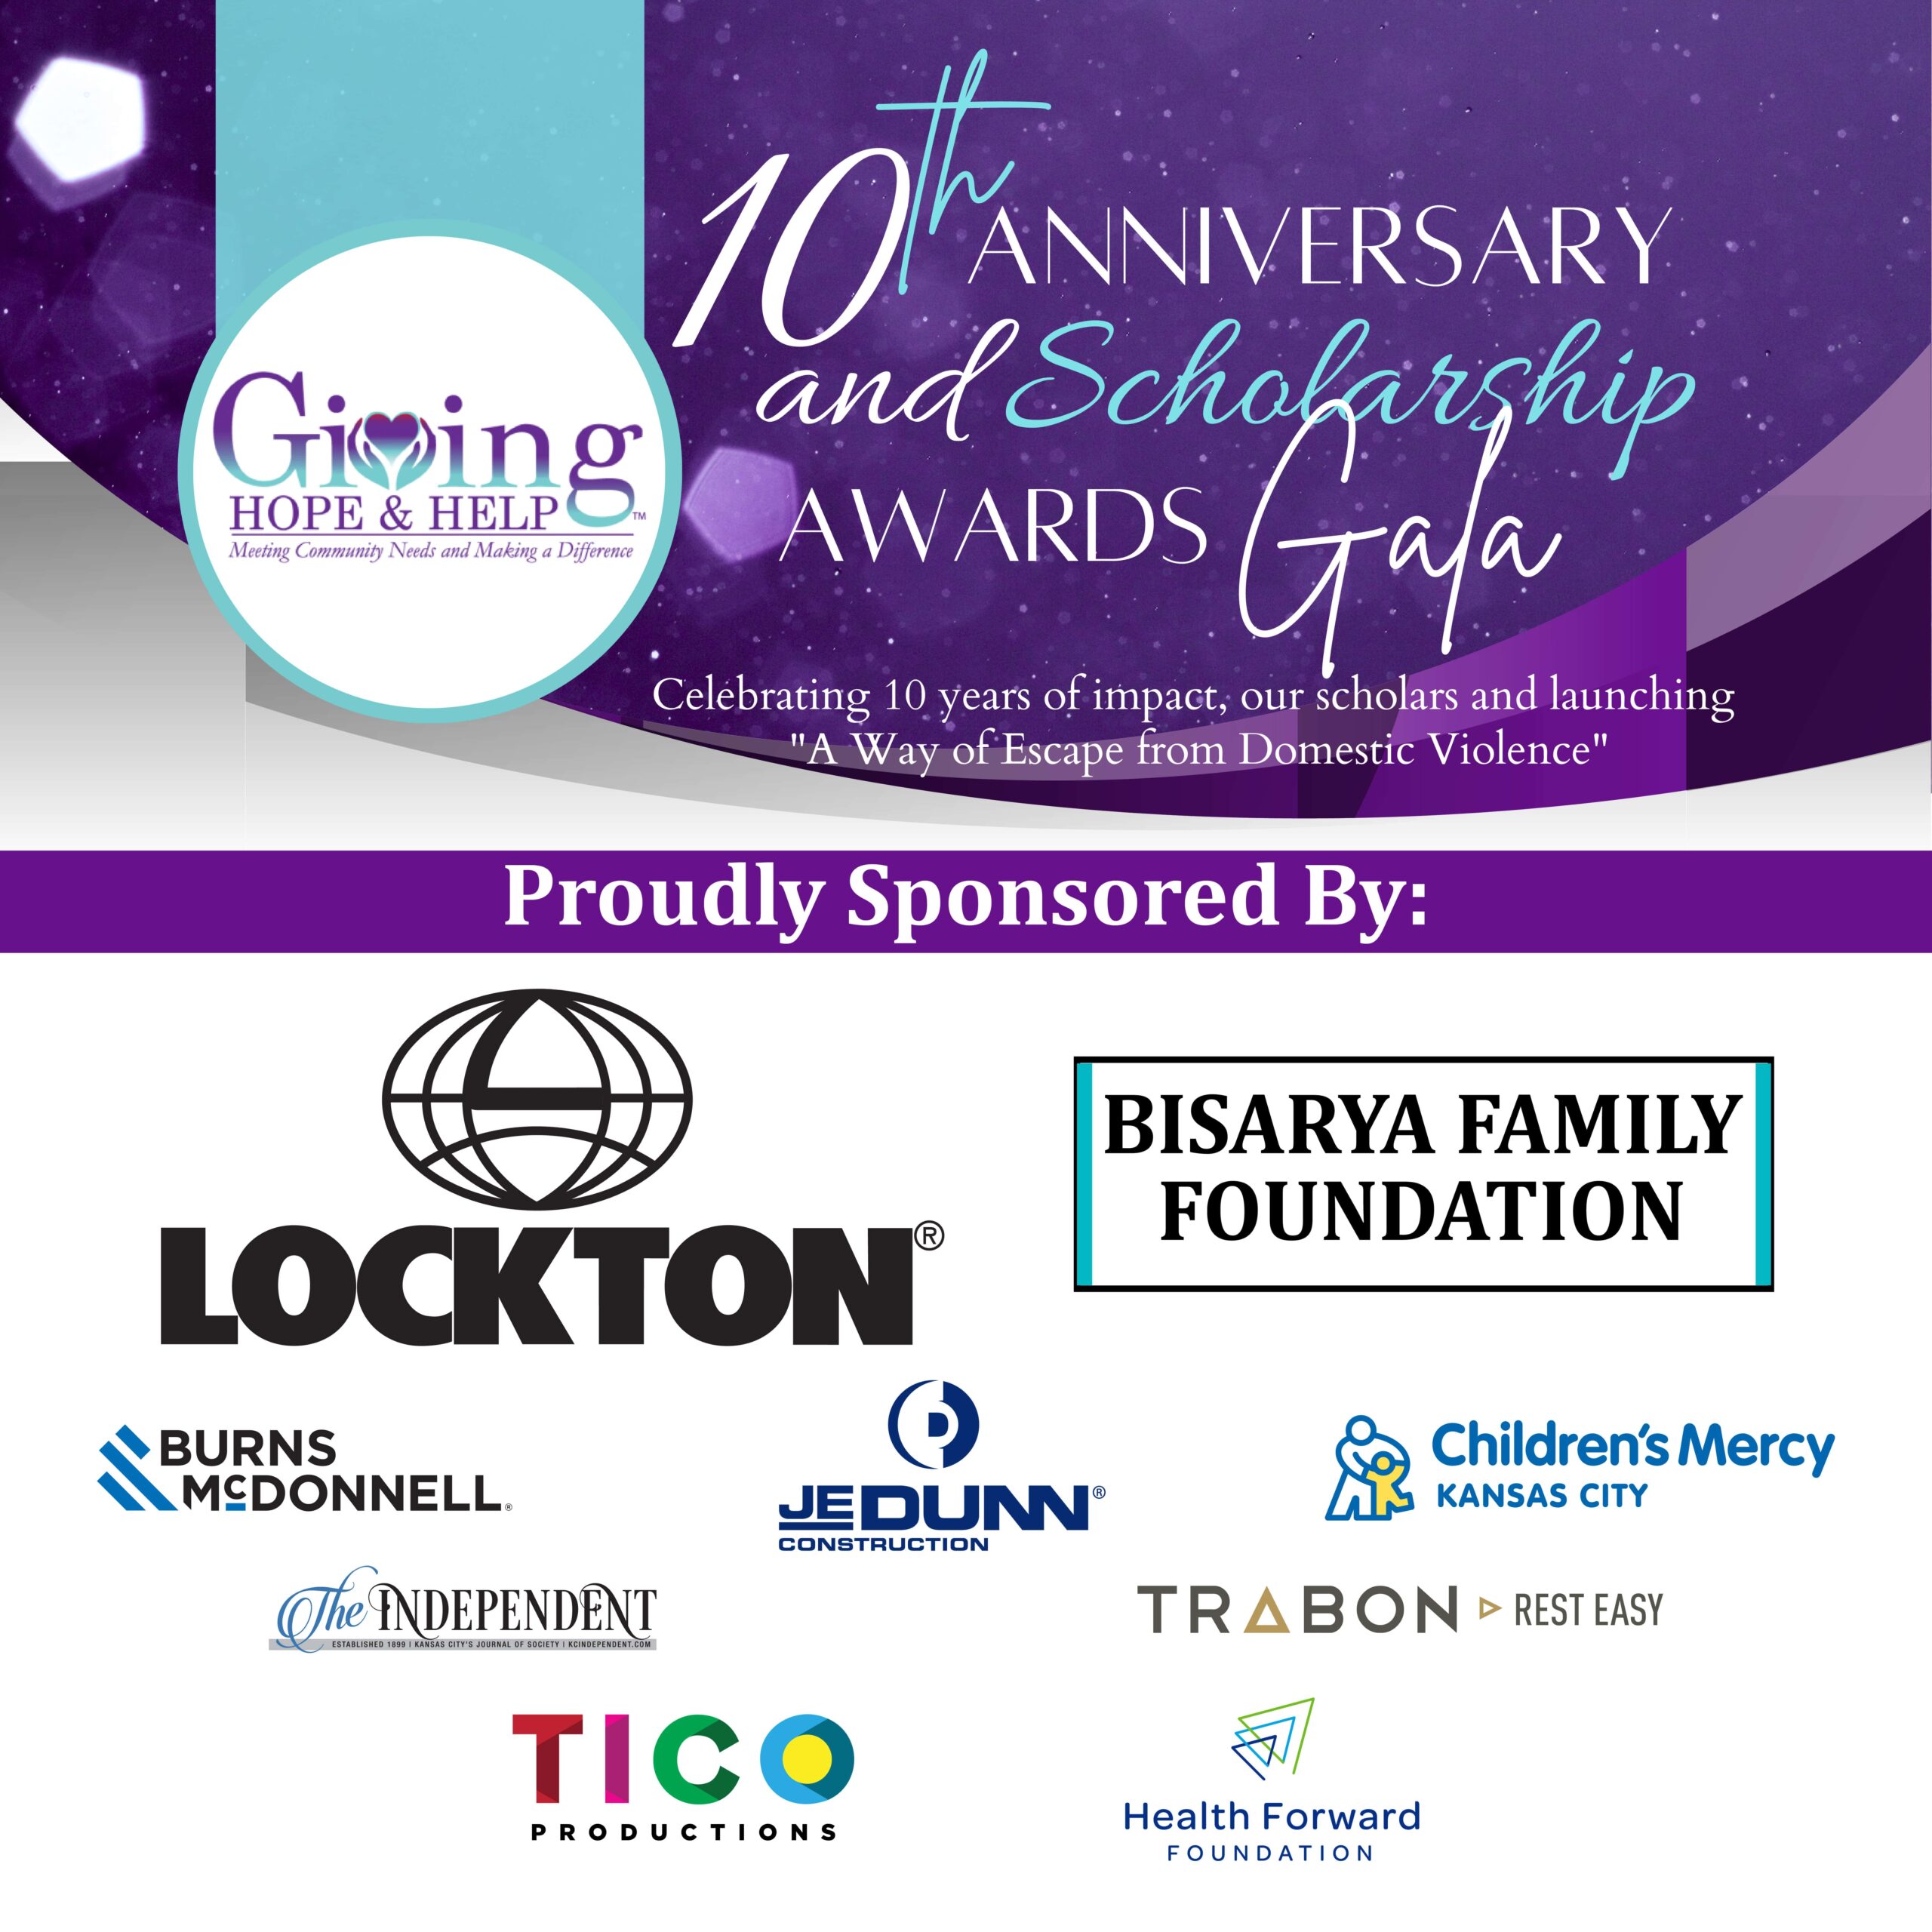 Giving Hope and Help 10th Anniversary and Scholarship Awards Gala in Kansas City